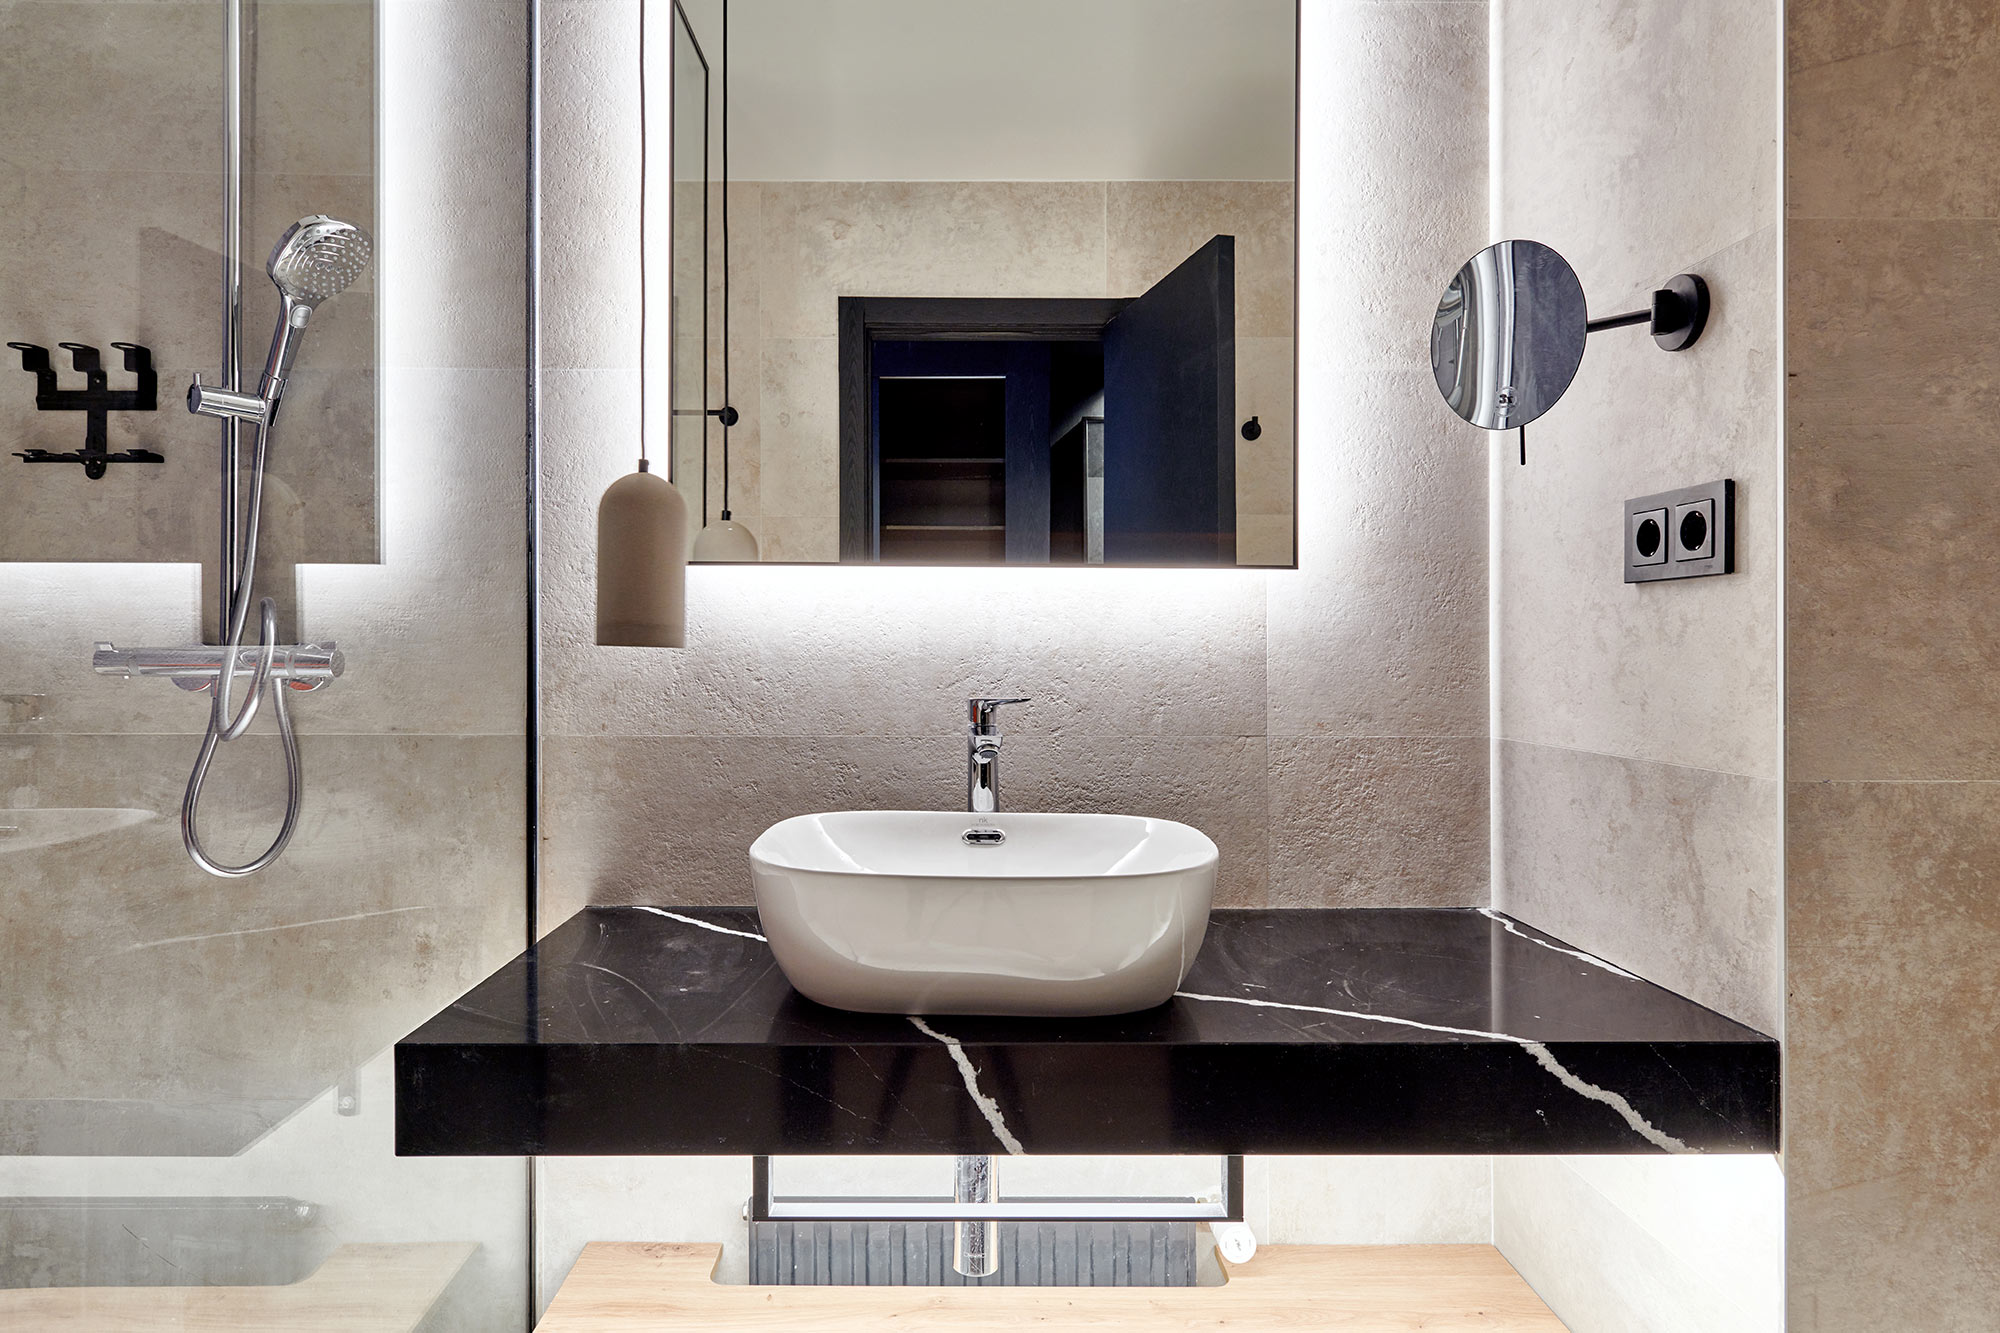 Image of radisson red madrid LGC 9164 in Silestone brings a touch of elegance to the Radisson RED Madrid hotel - Cosentino